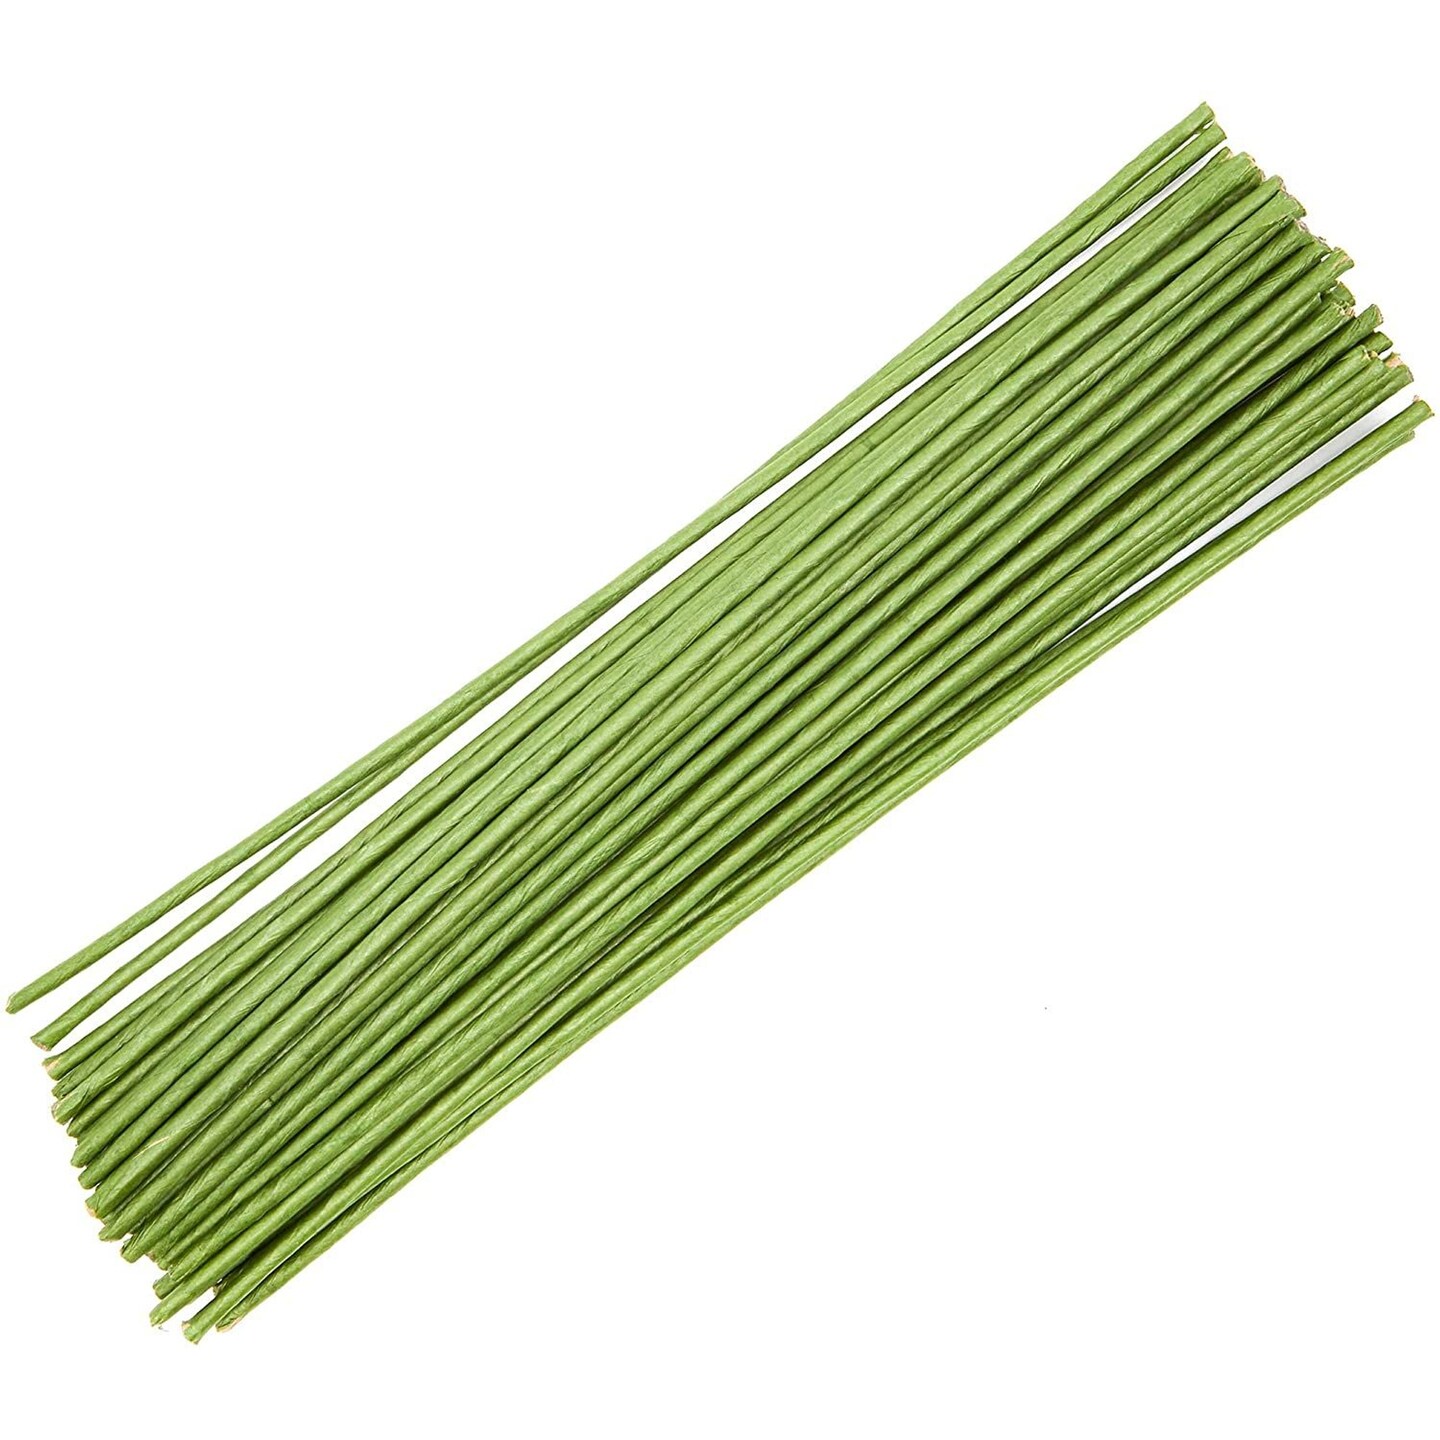 50 Piece 6 Gauge Green Floral Wire for Flower Stems, DIY Crafts, Wedding Decorations (16 Inches)